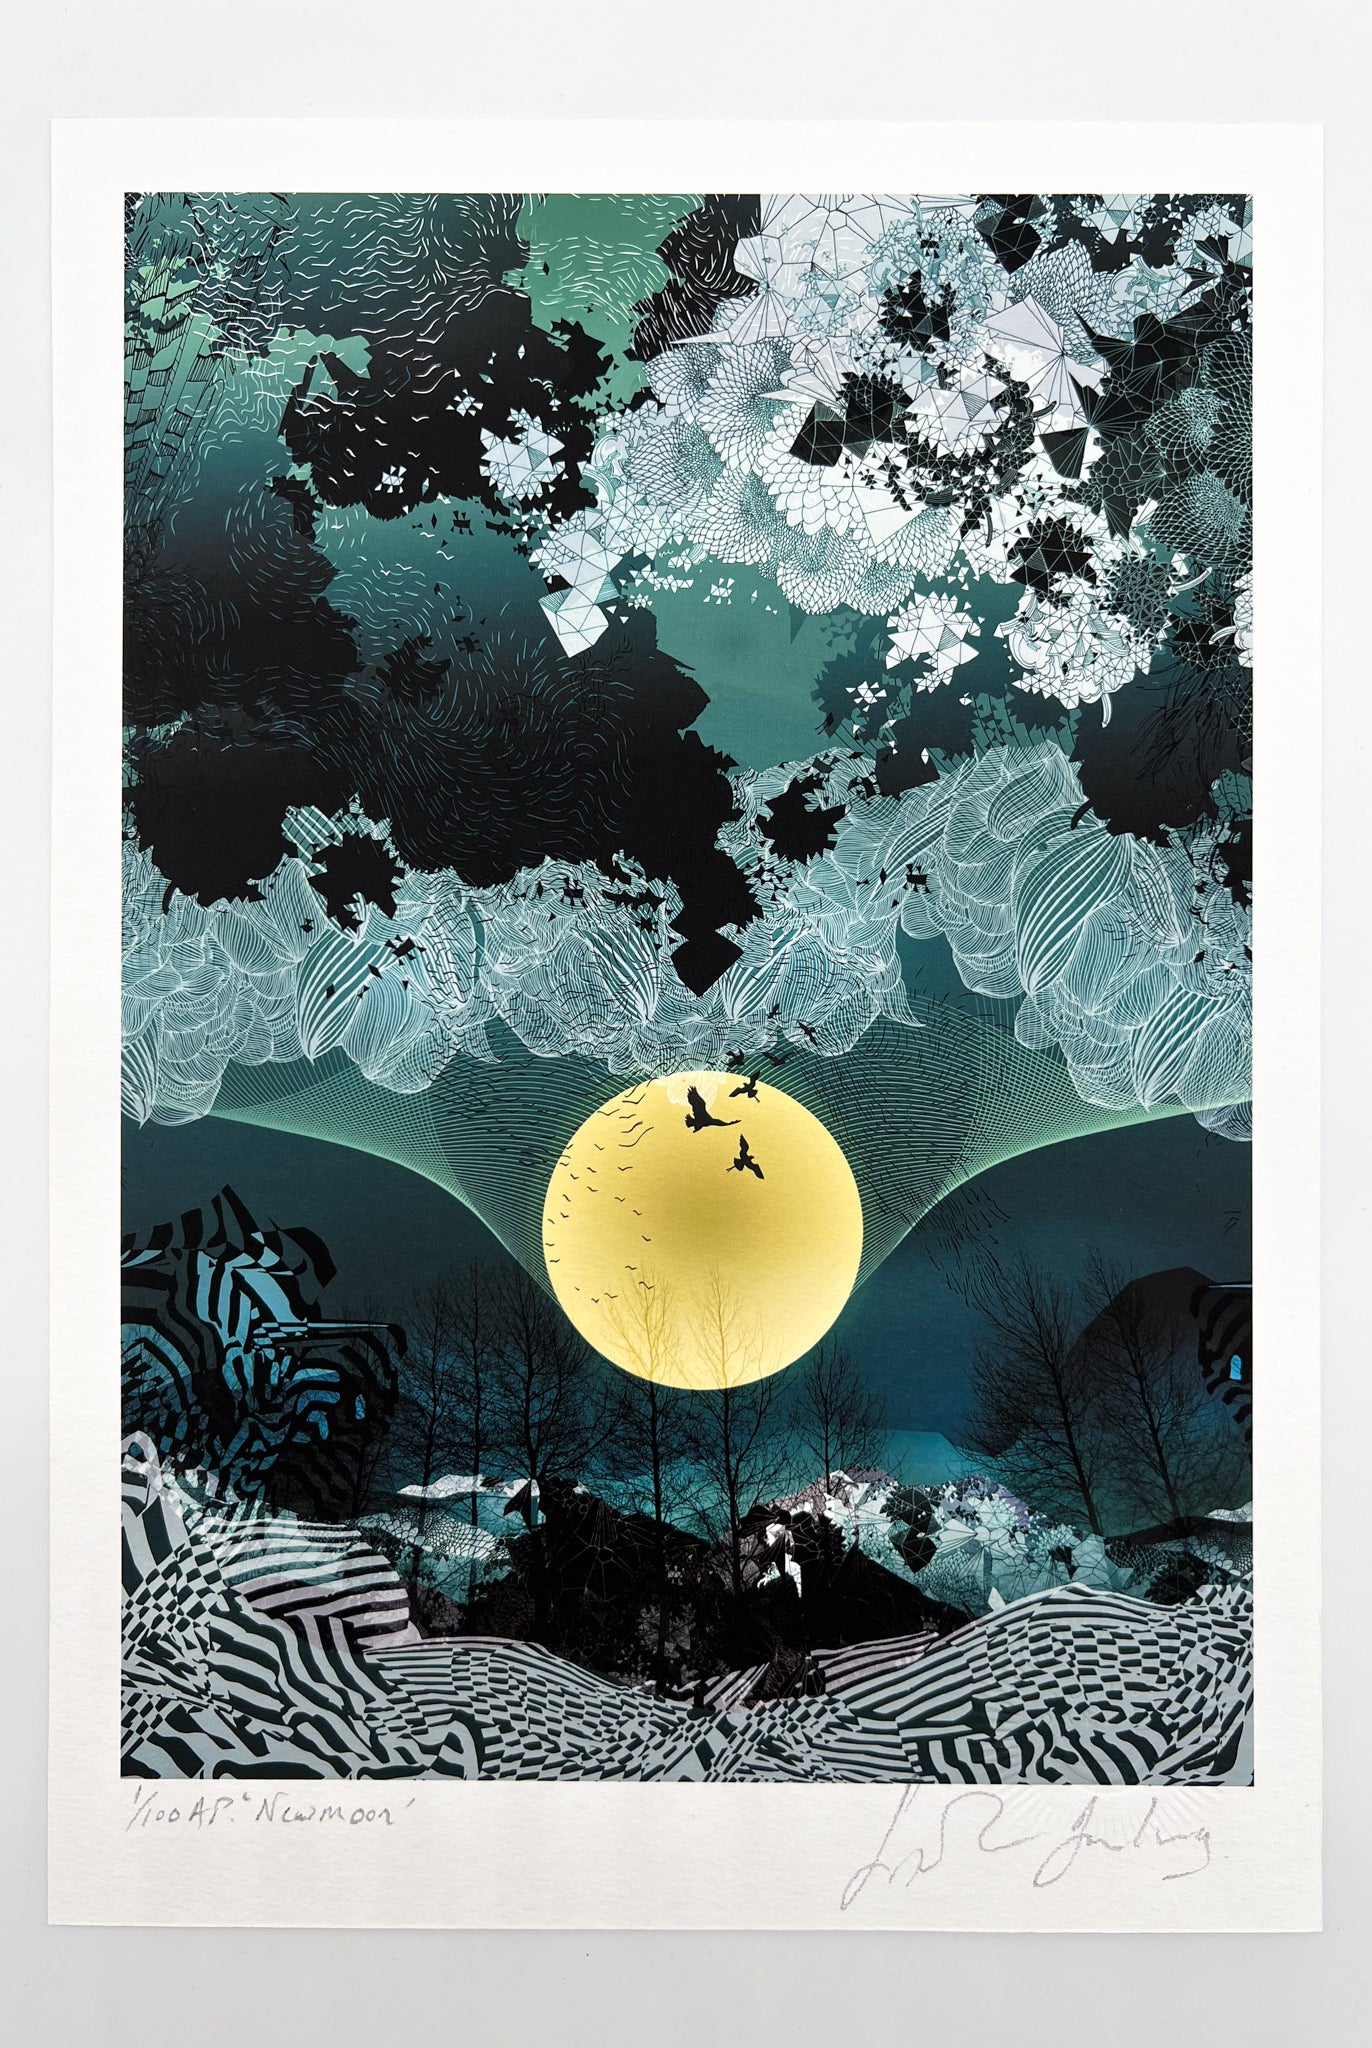 A giclee print of a large yellow moon, birds and a blue landscapes design